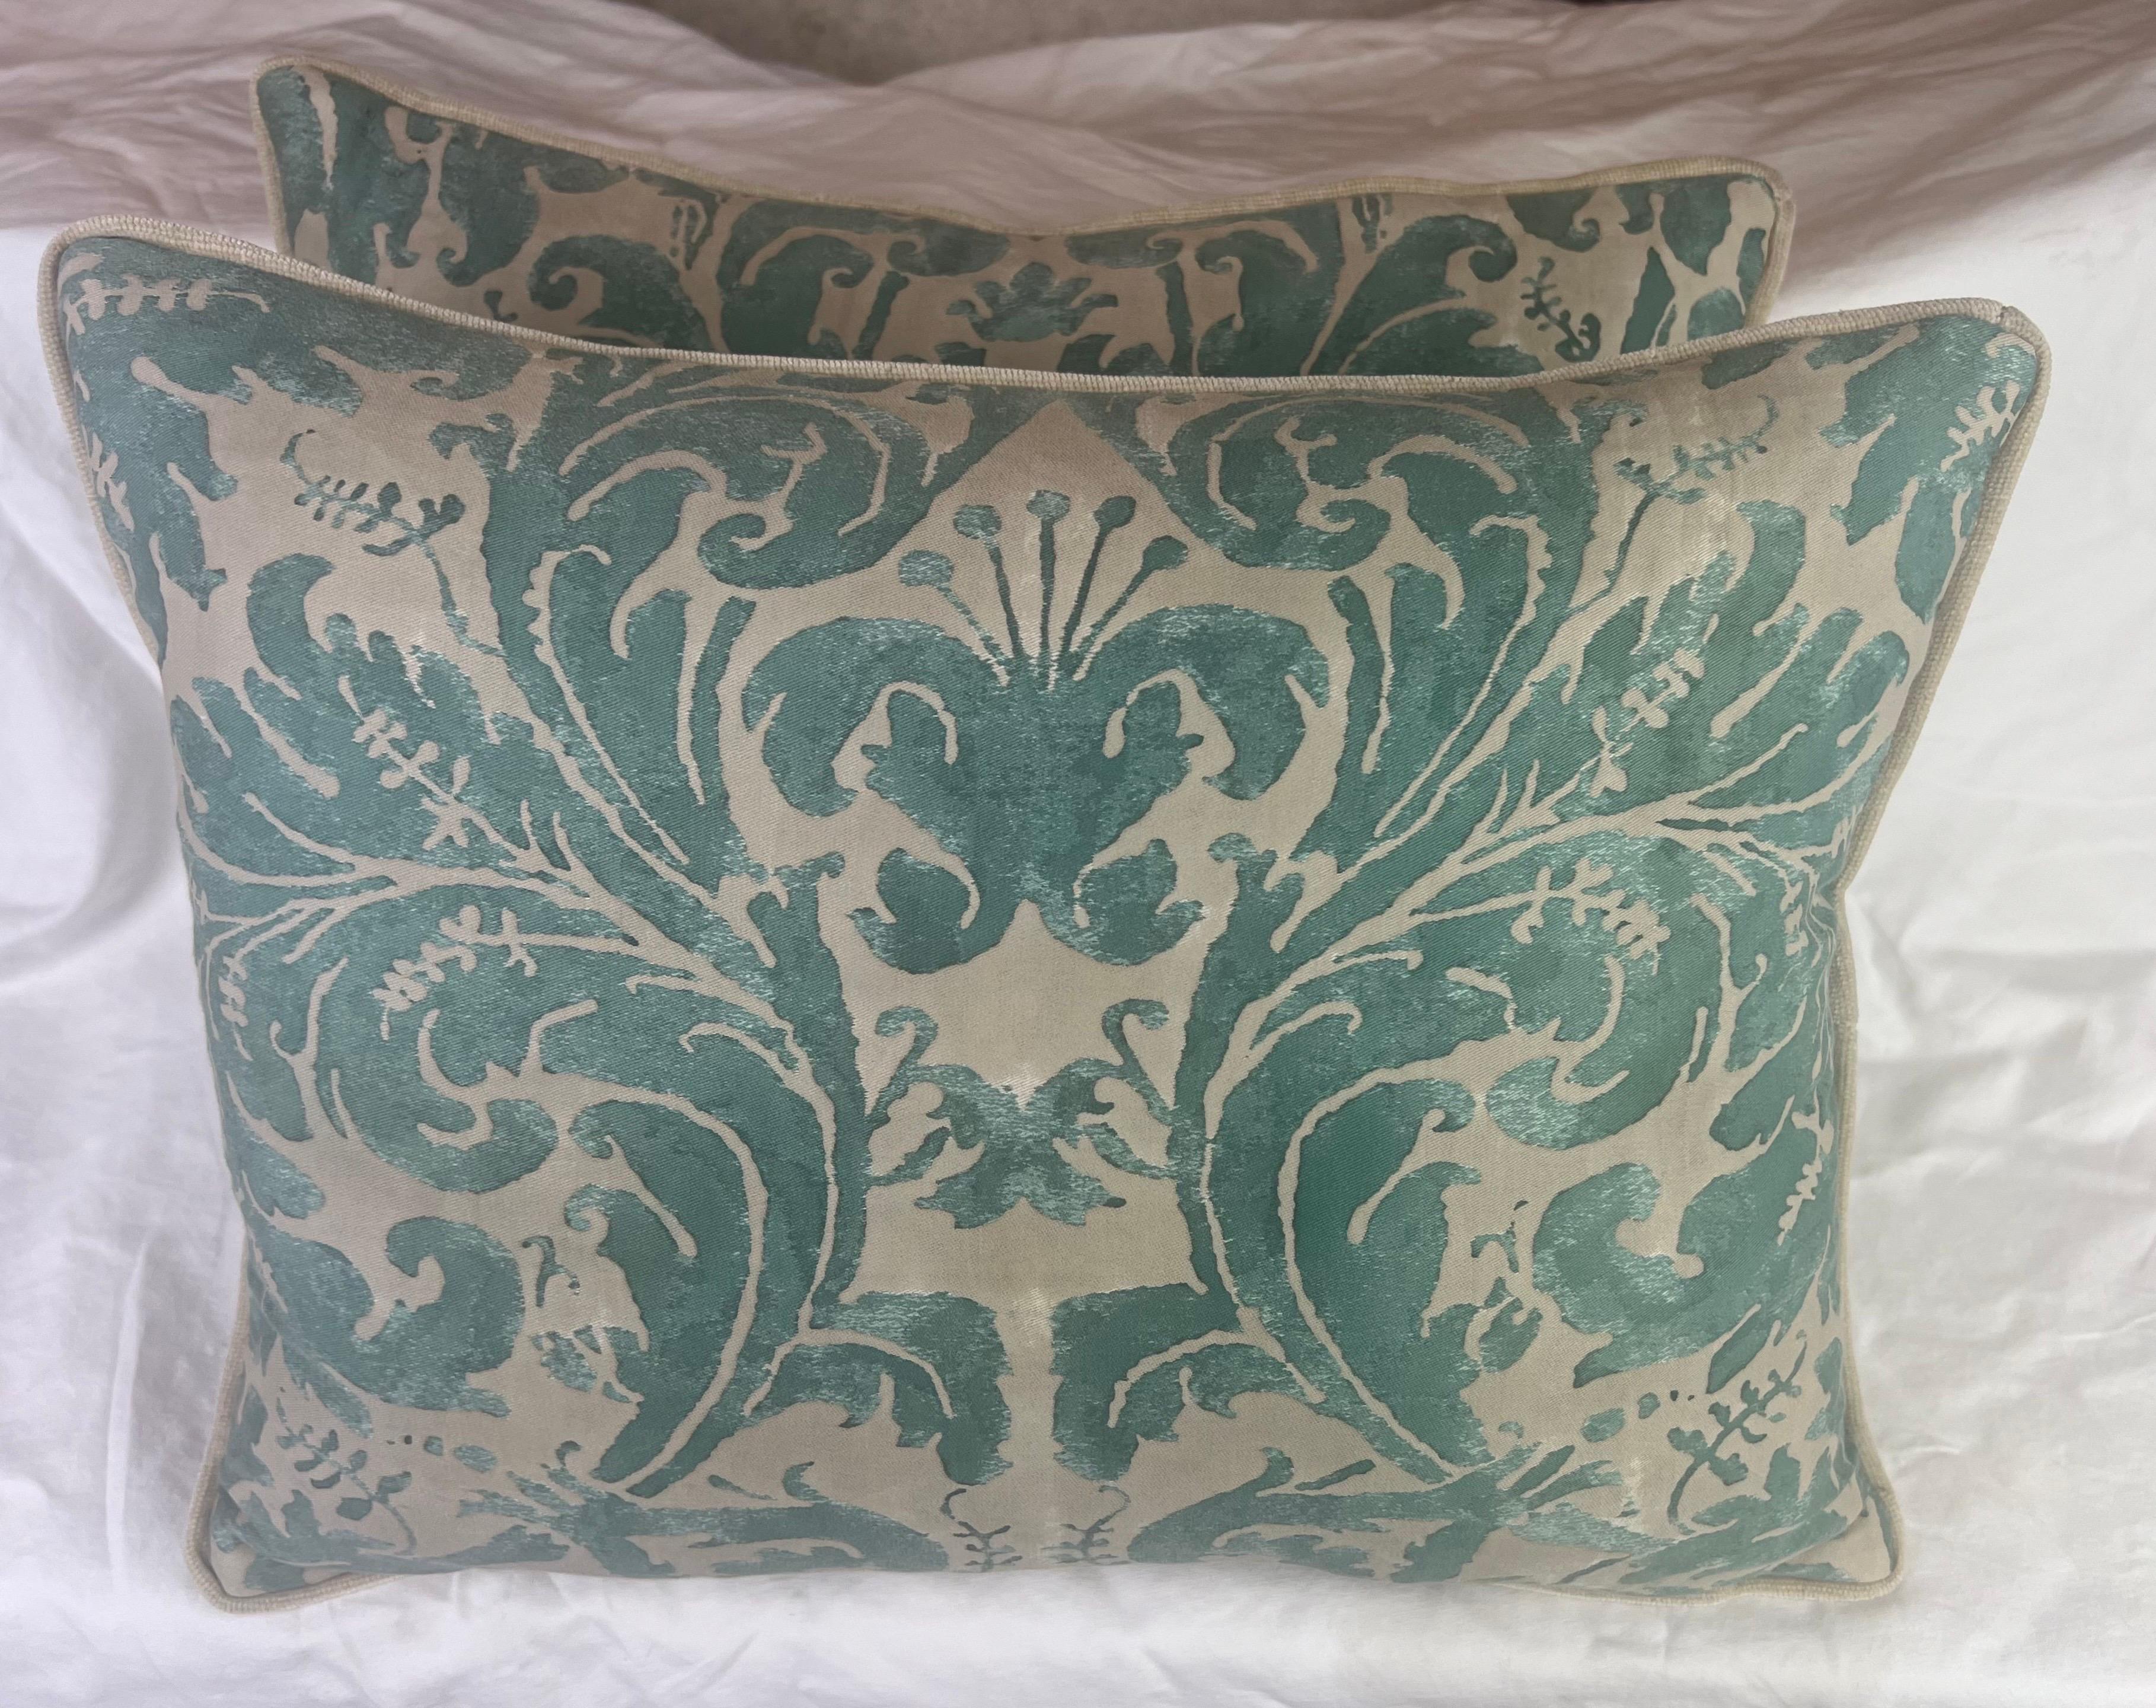 Pair of custom green & beige Fortuny Lucrezia patterned pillows with velvet backs.  The seventeenth-century Italian design, paying homage to an ancient noblewoman, adds a rich historical and cultural dimension to the pillows.  The large plumes and